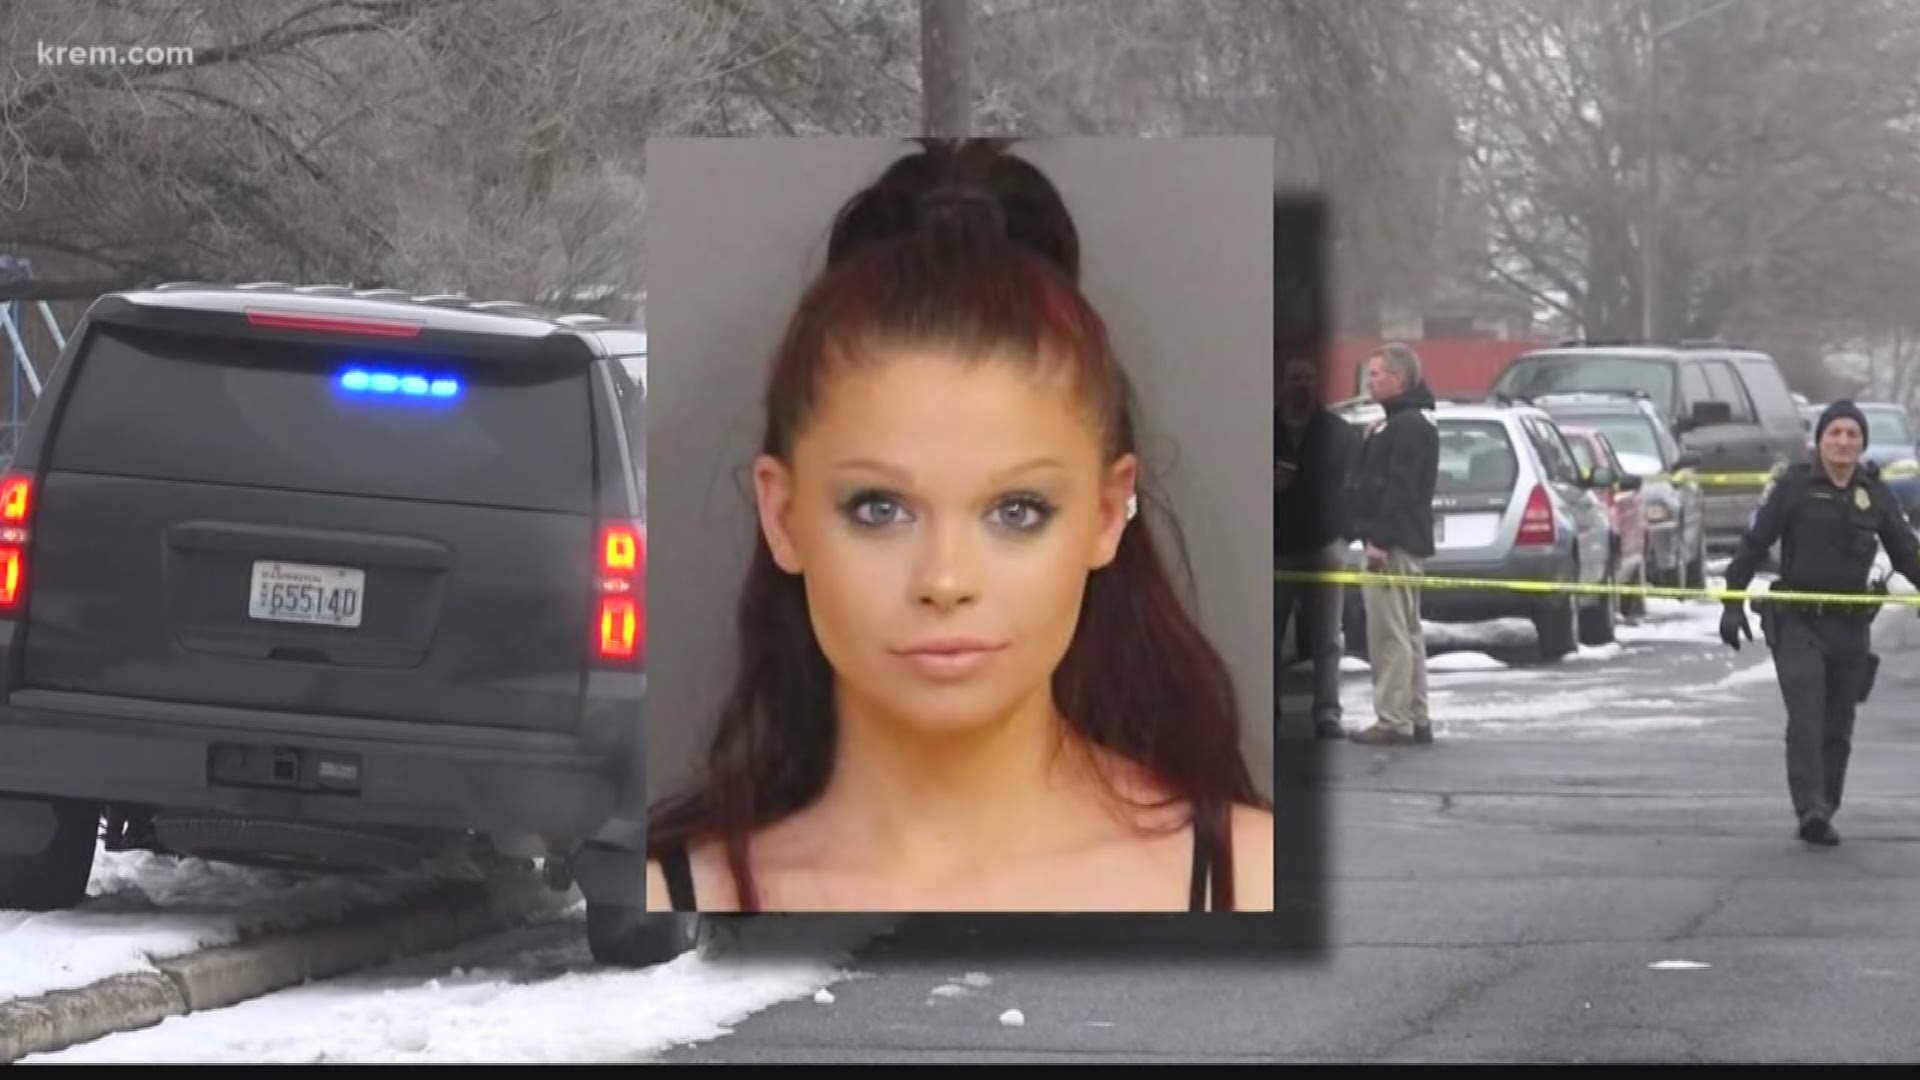 Officers received a tip that 25-year-old shooting suspect Ashley Horning was in a parking lot. When officers arrived, she was with another person but their relationship was unclear.